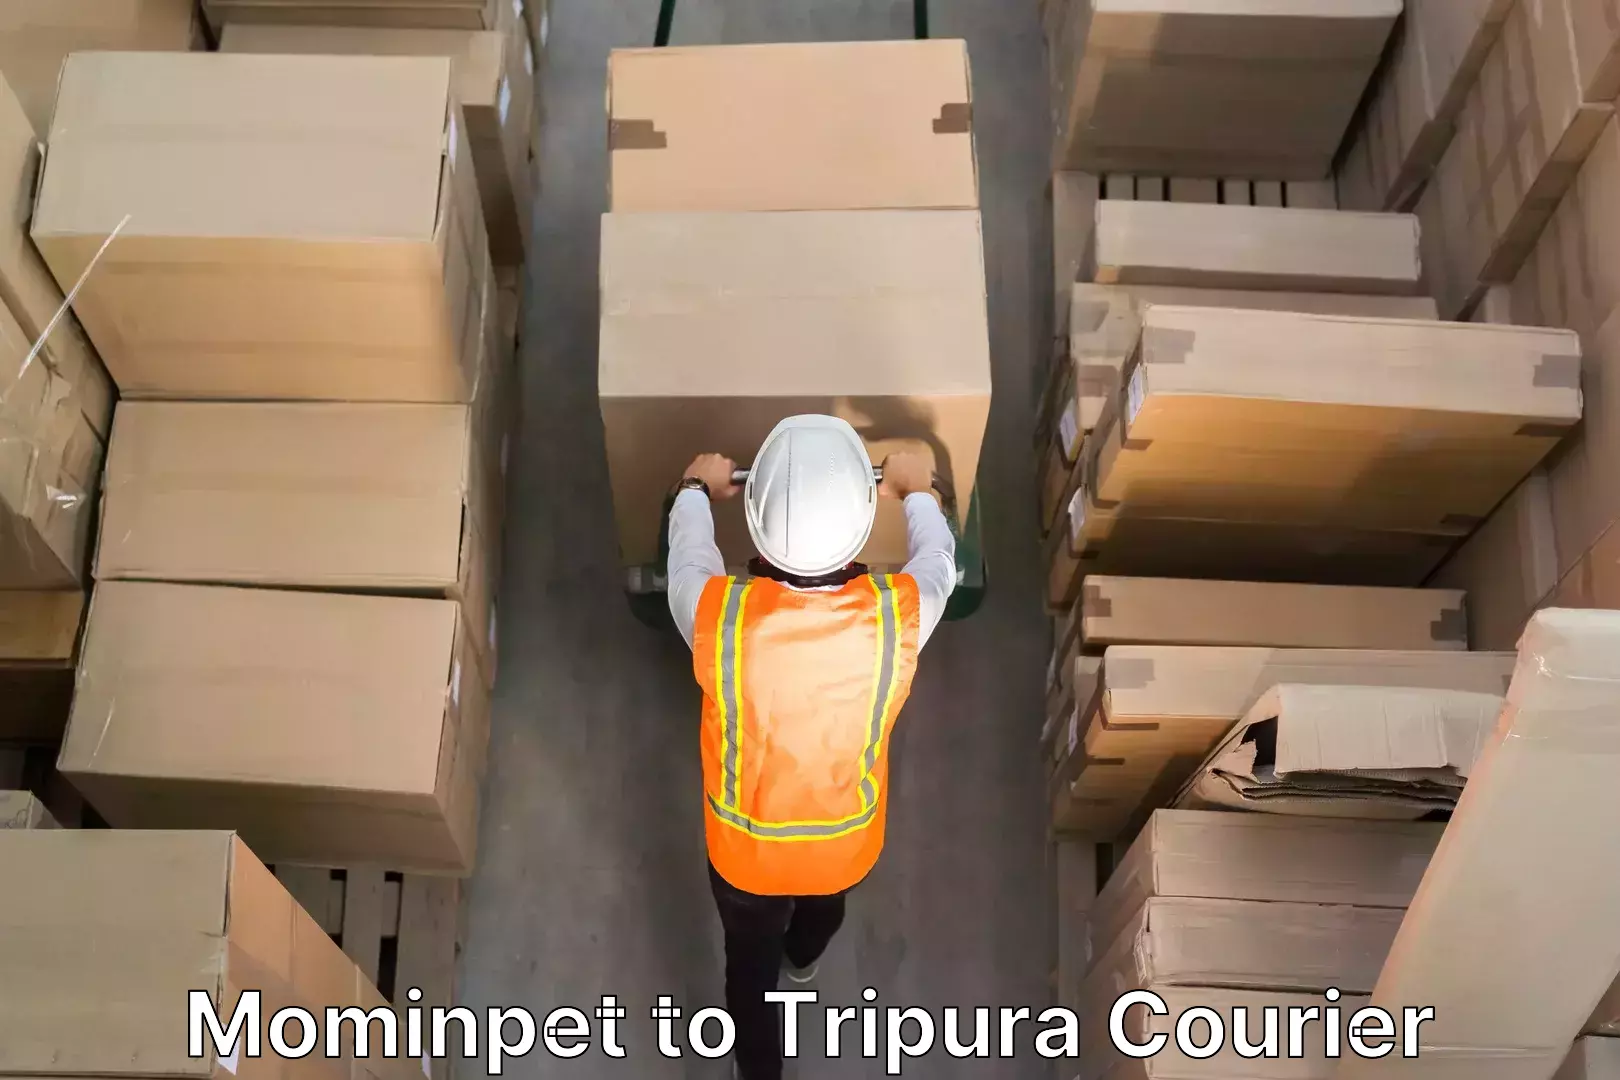 Furniture relocation experts Mominpet to Tripura